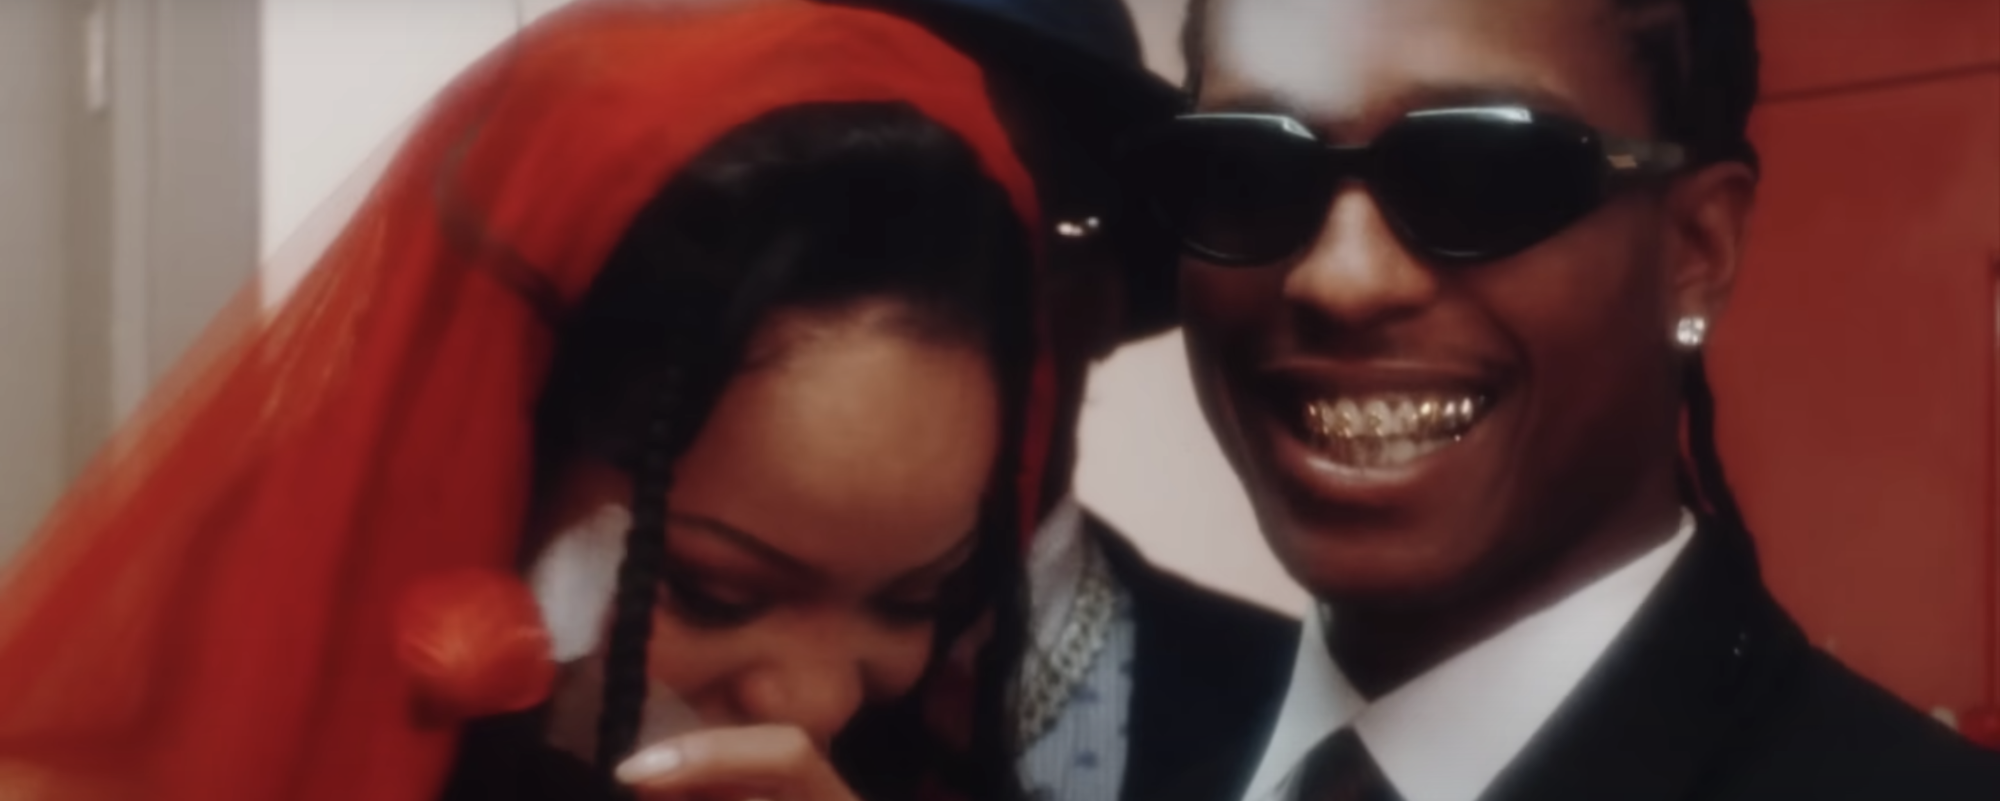 A$AP Rocky’s New Music Video Features a Mock Wedding with Rihanna